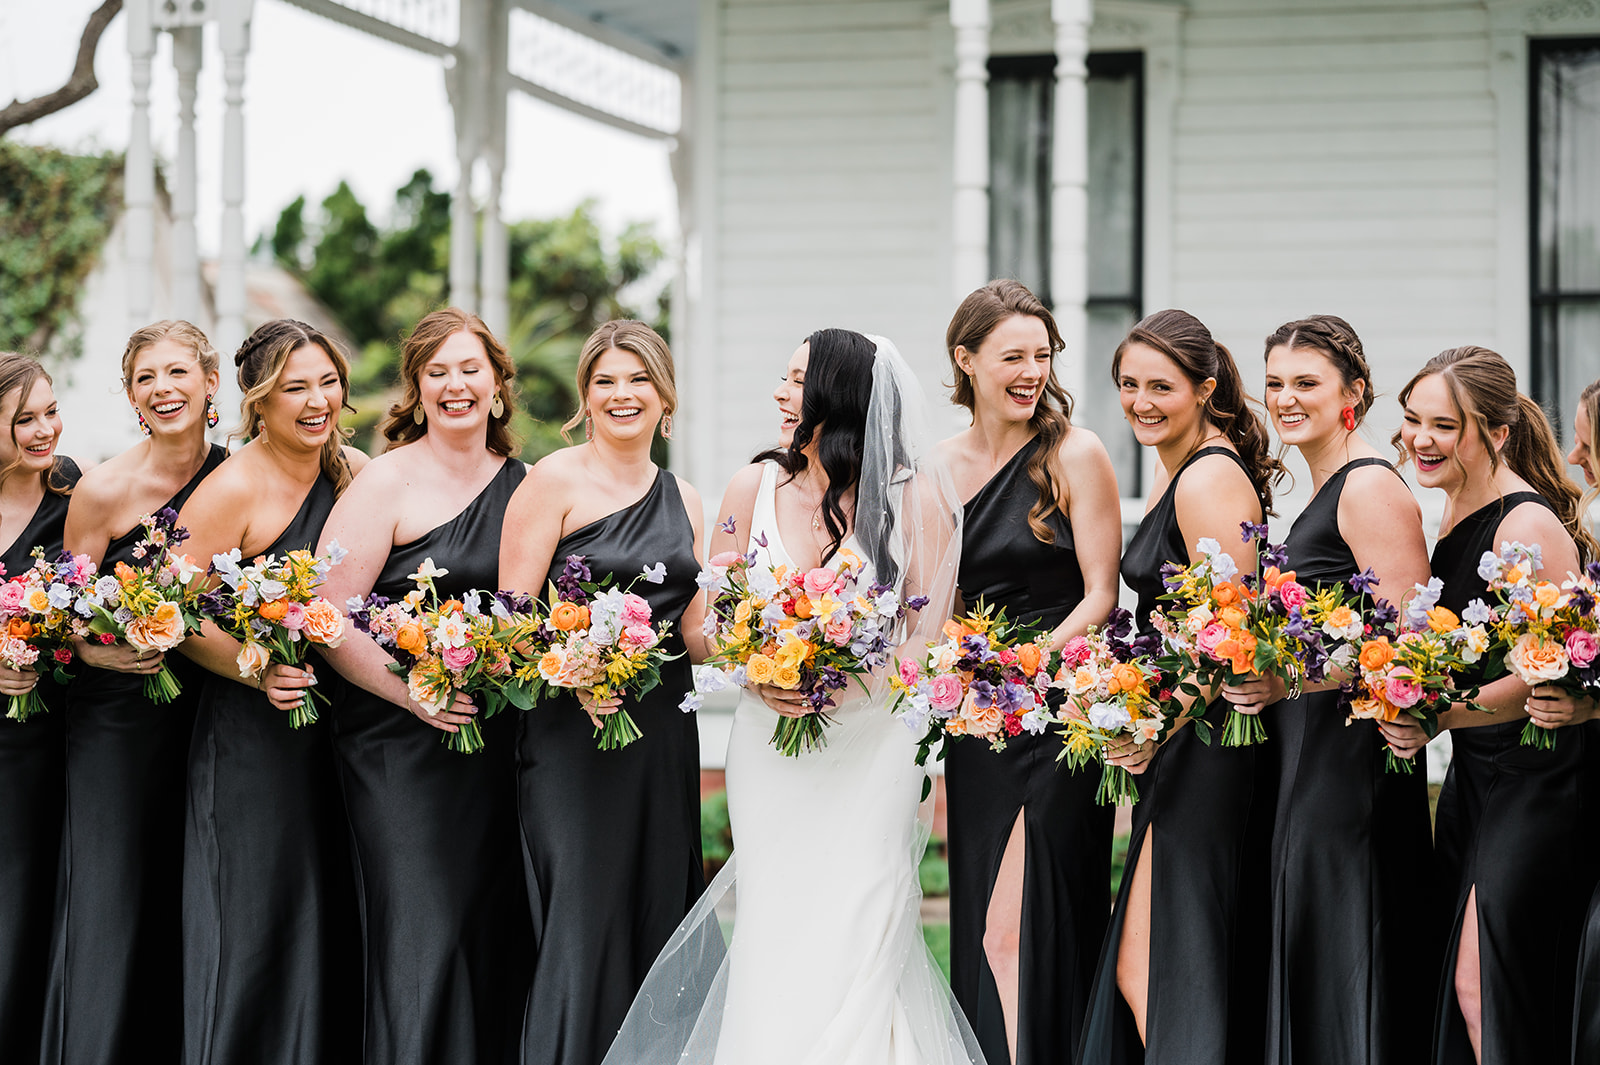 Bride with bridesmaids holding colorful bouquets